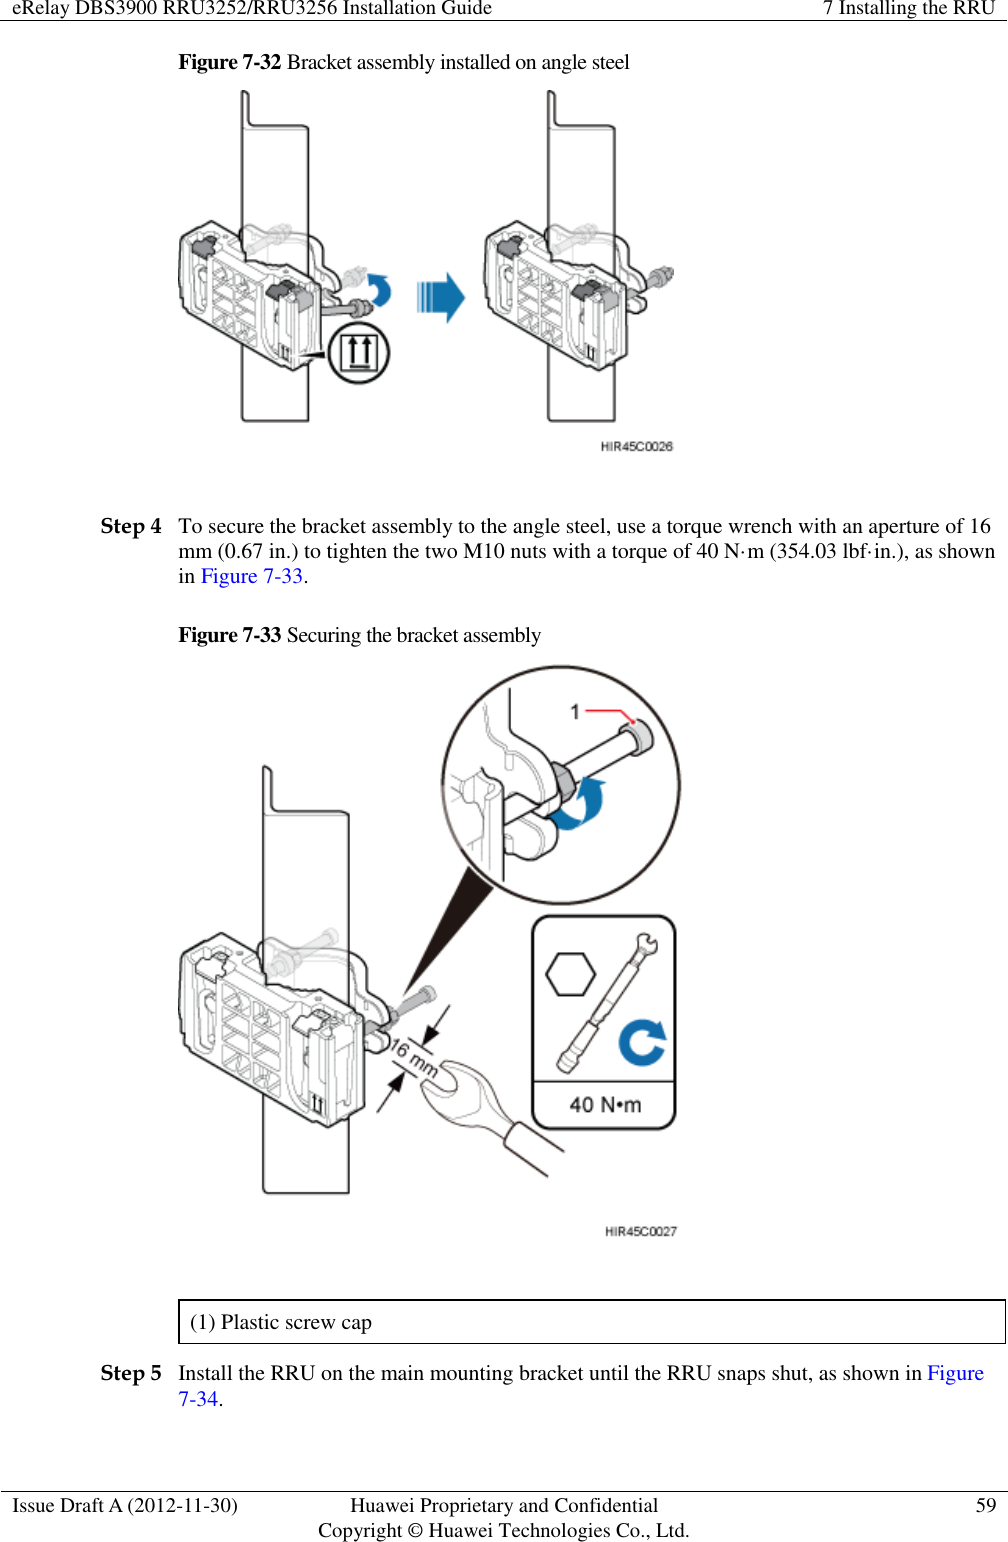 eRelay DBS3900 RRU3252/RRU3256 Installation Guide 7 Installing the RRU  Issue Draft A (2012-11-30) Huawei Proprietary and Confidential                                     Copyright © Huawei Technologies Co., Ltd. 59  Figure 7-32 Bracket assembly installed on angle steel   Step 4 To secure the bracket assembly to the angle steel, use a torque wrench with an aperture of 16 mm (0.67 in.) to tighten the two M10 nuts with a torque of 40 N·m (354.03 lbf·in.), as shown in Figure 7-33.   Figure 7-33 Securing the bracket assembly   (1) Plastic screw cap Step 5 Install the RRU on the main mounting bracket until the RRU snaps shut, as shown in Figure 7-34. 